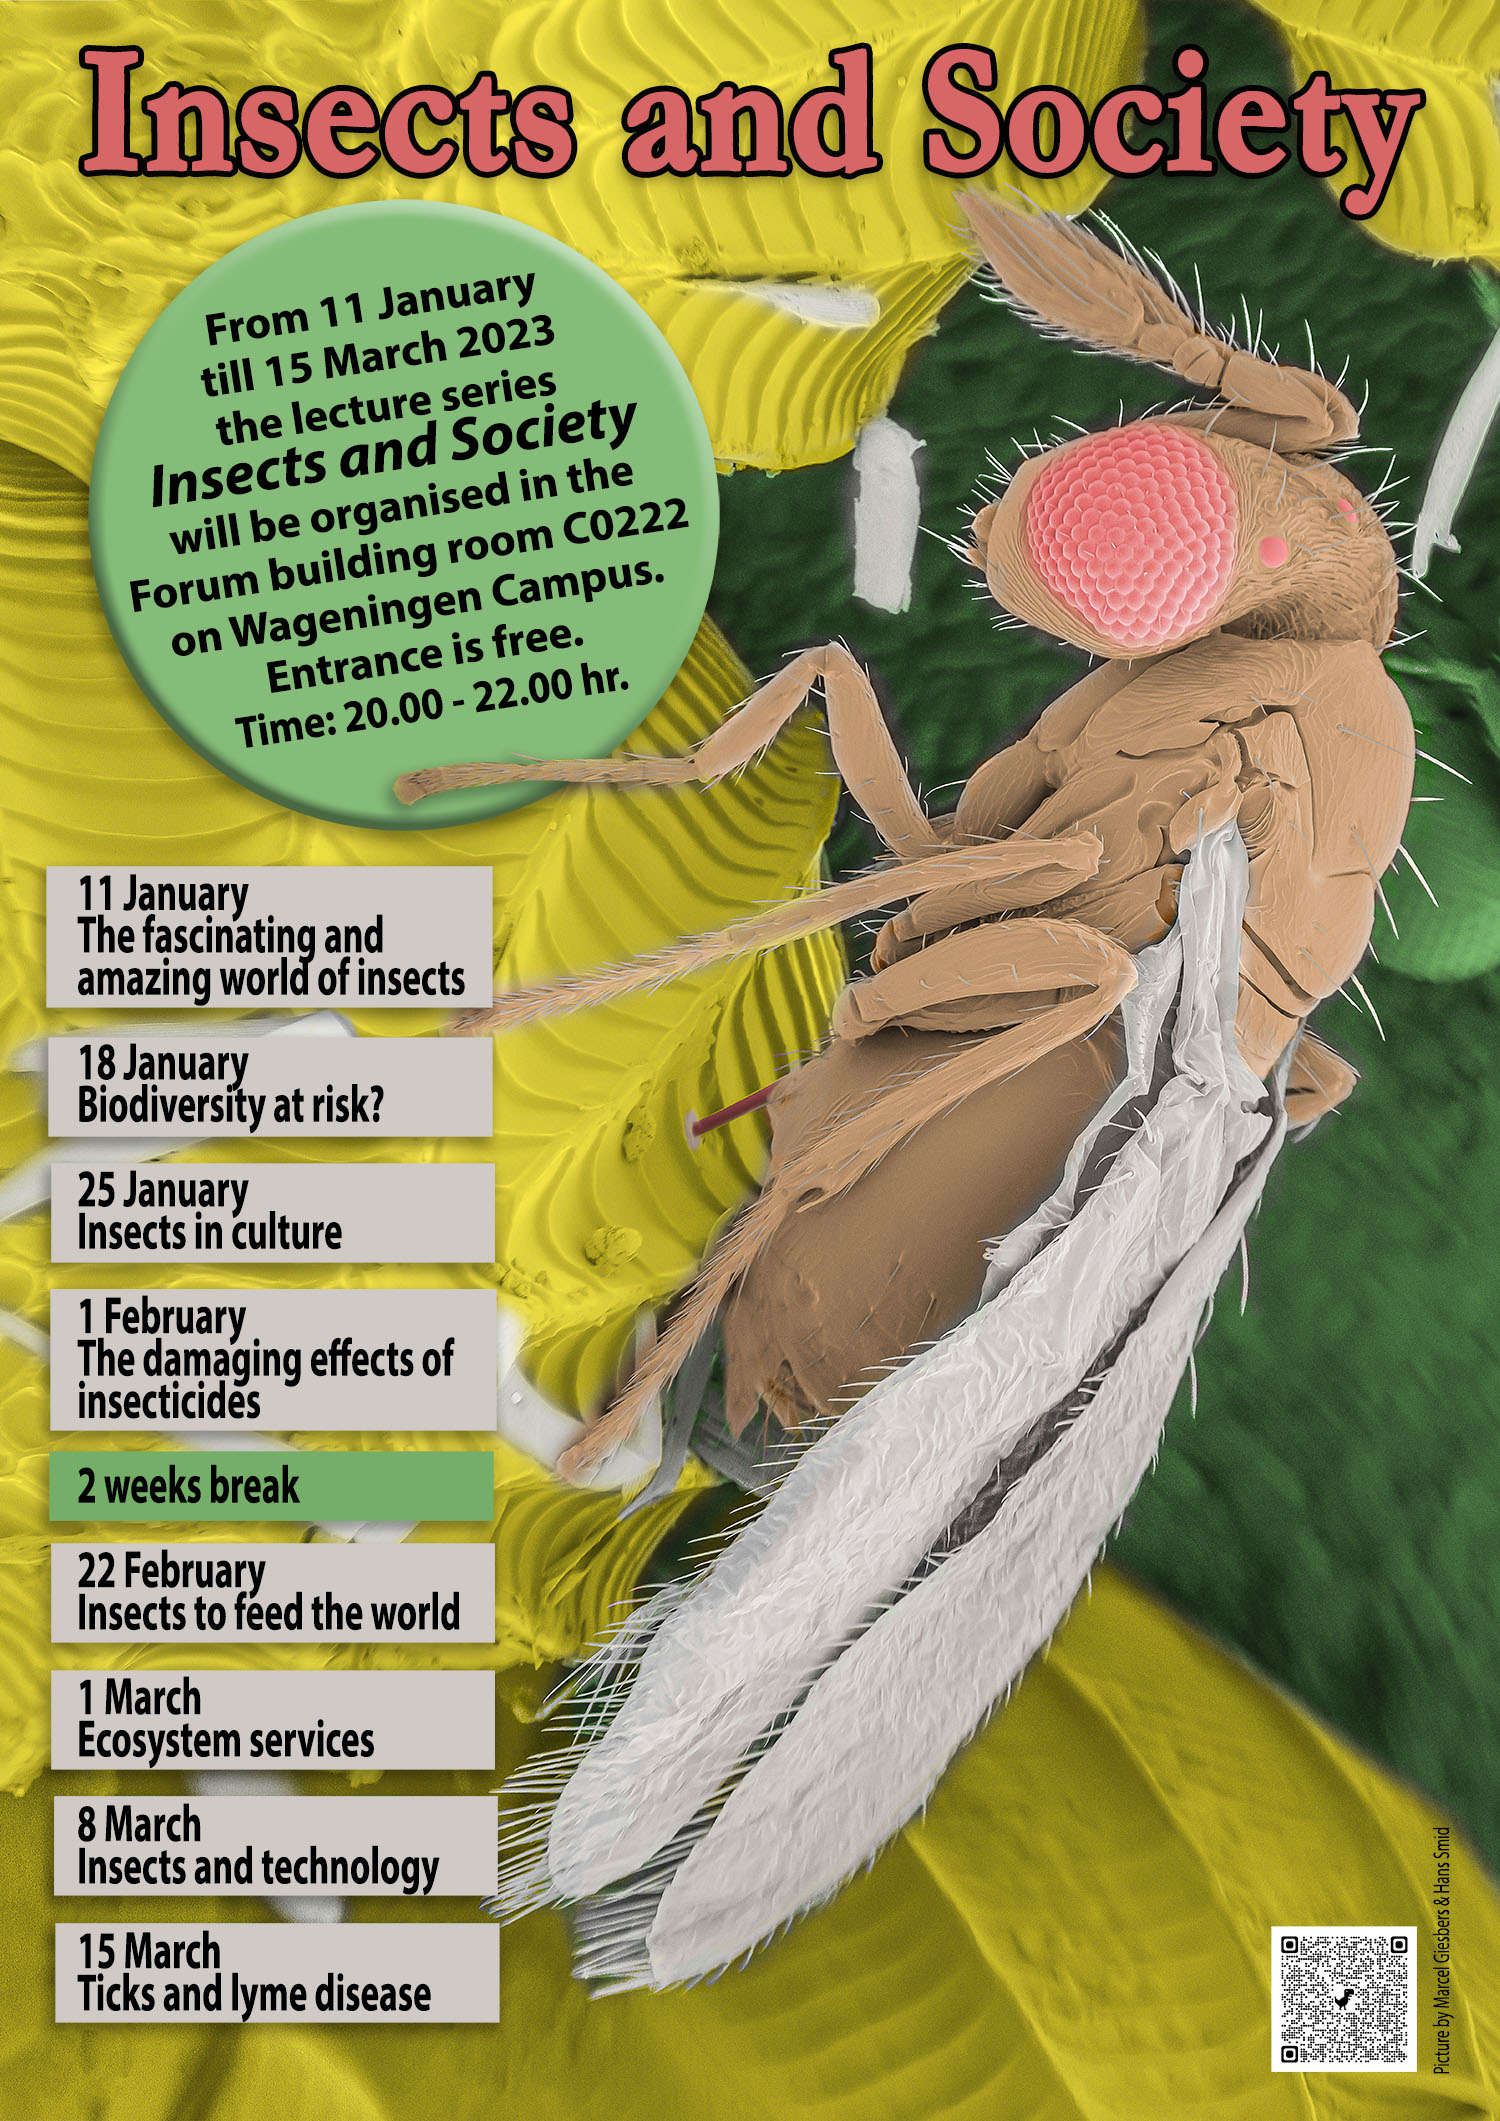 insects and societyposter 2023 web.jpg